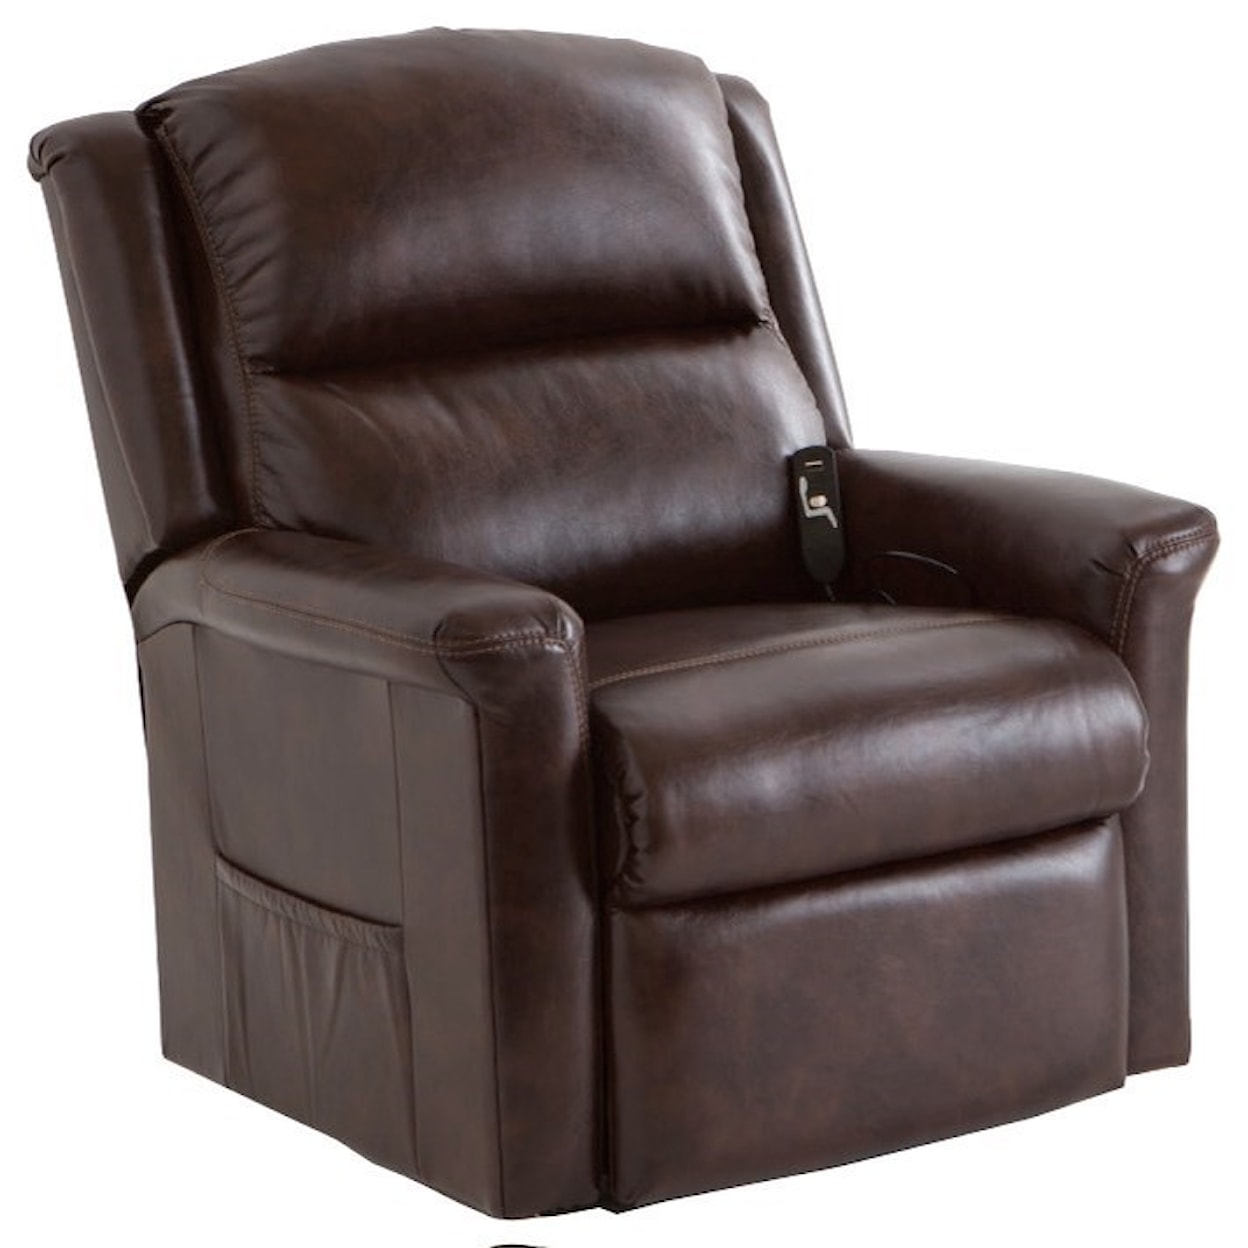 Franklin Lift and Power Recliners Province Lift Recliner